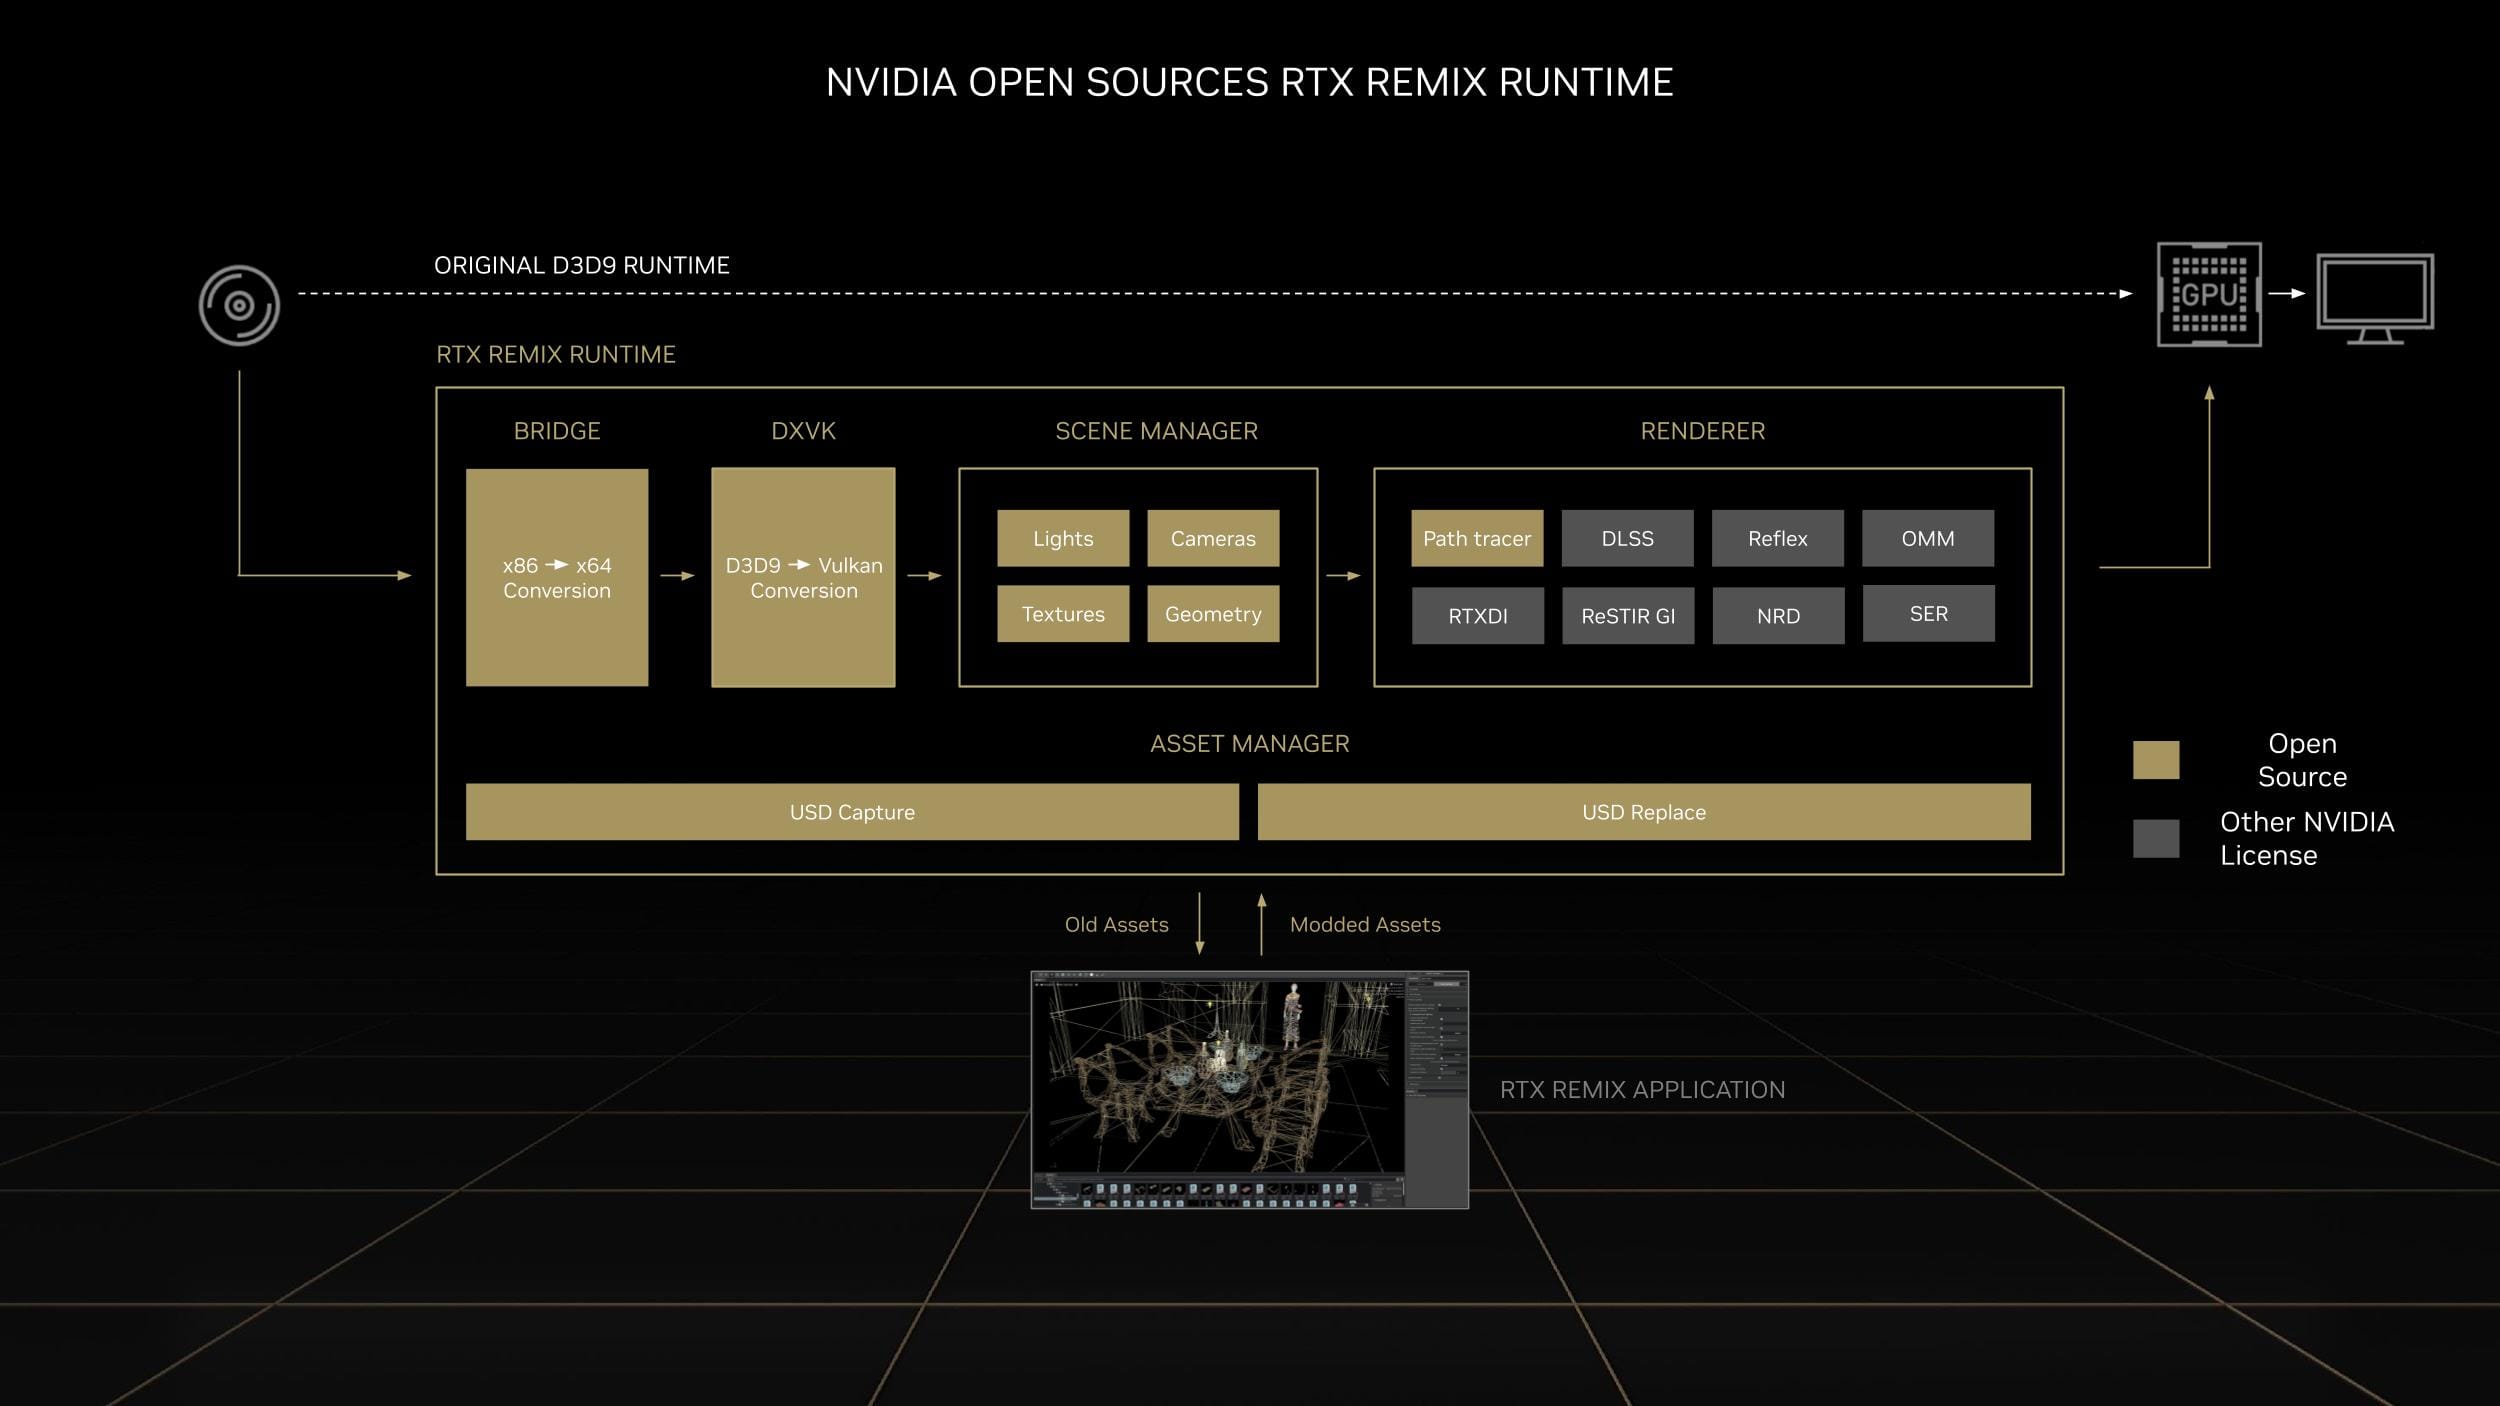 nvidia-open-sources-rtx-remix-runtime.jpg